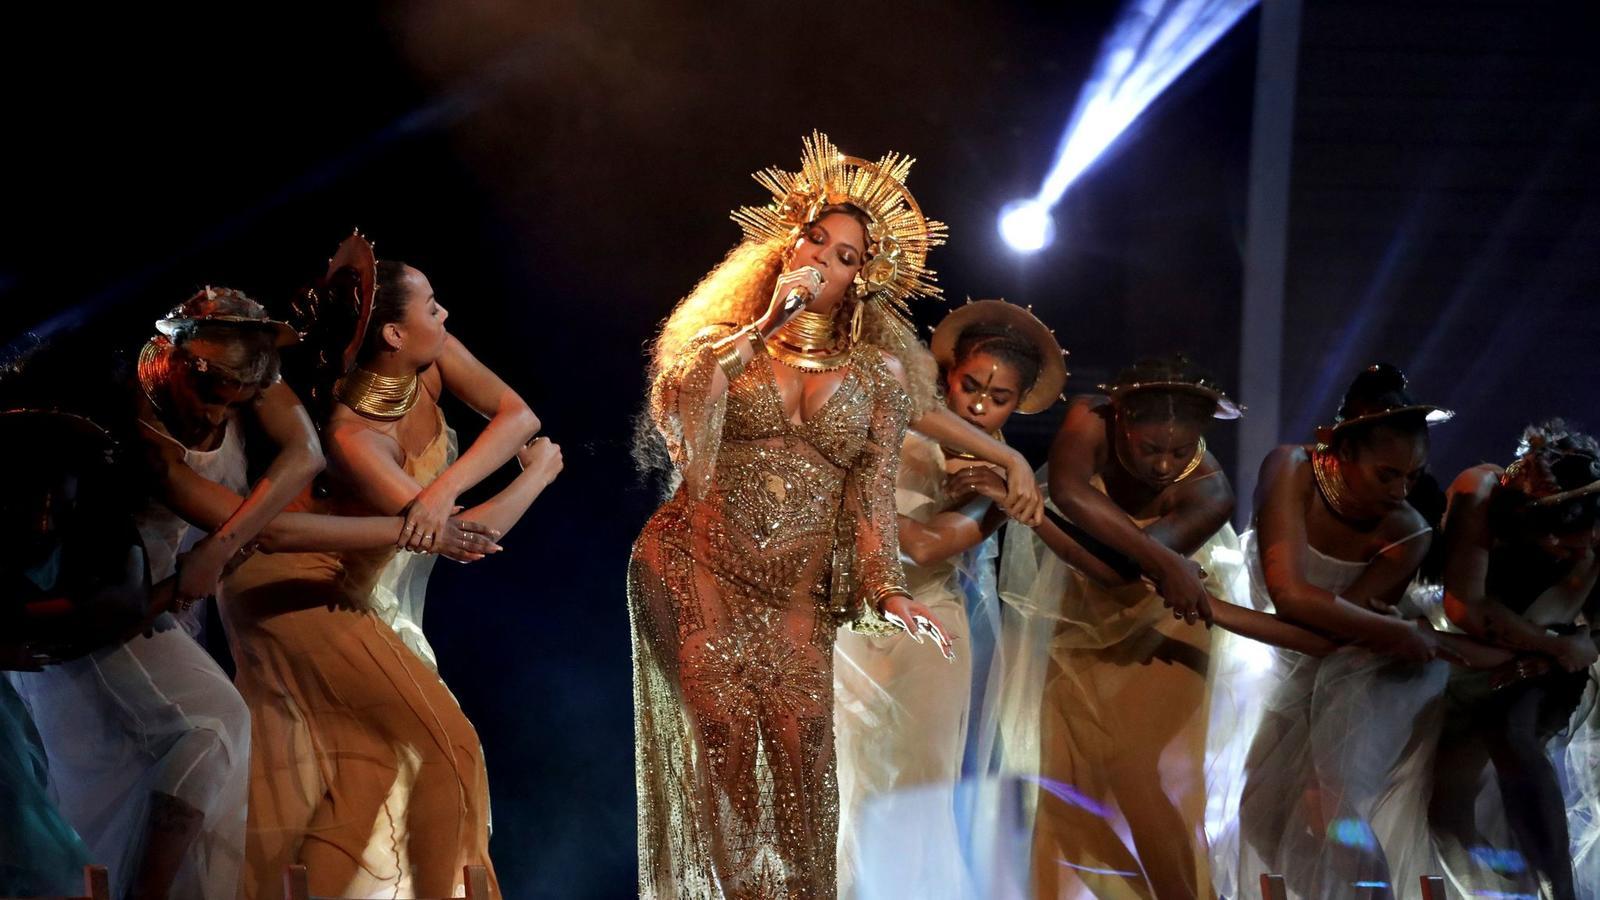 Beyoncé Drops Out of Coachella 2017, will headline in 2018 instead